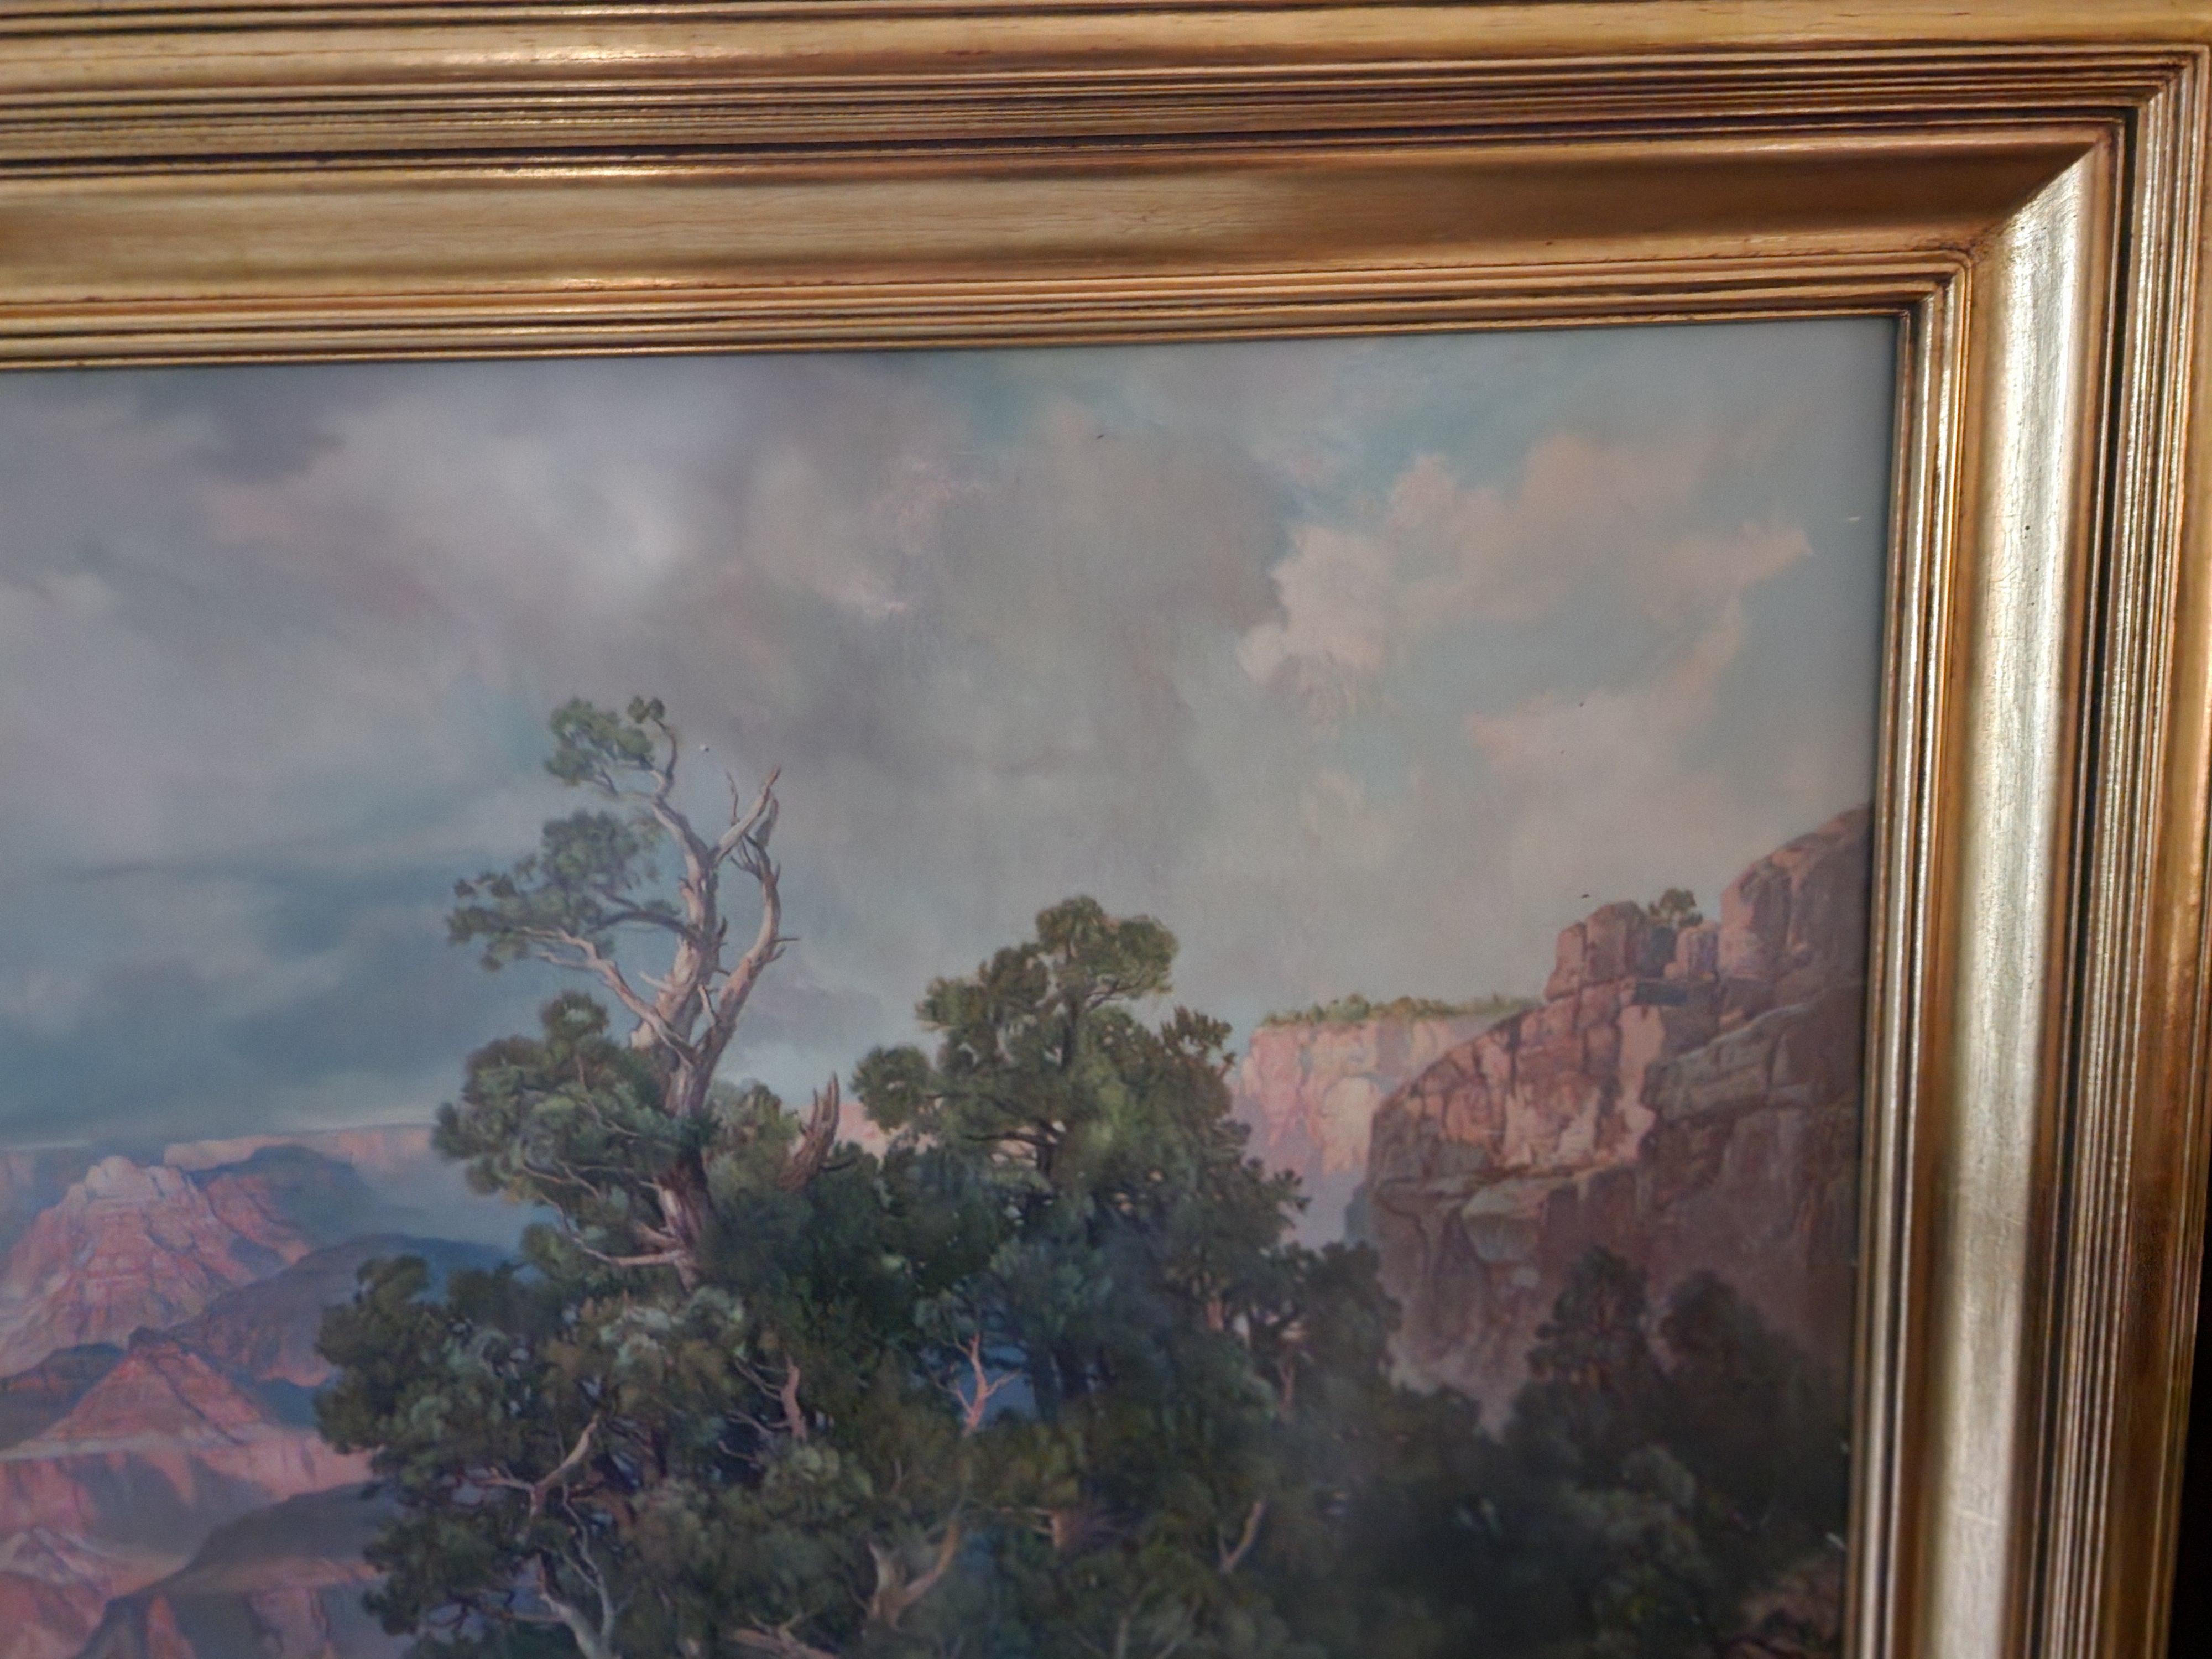 The original painting by Thomas Moran was sold to the Santa Fe railroad company which copyrighted the image and made prints to hang in railway stations to promote tourism and therefore ridership on their railroad!